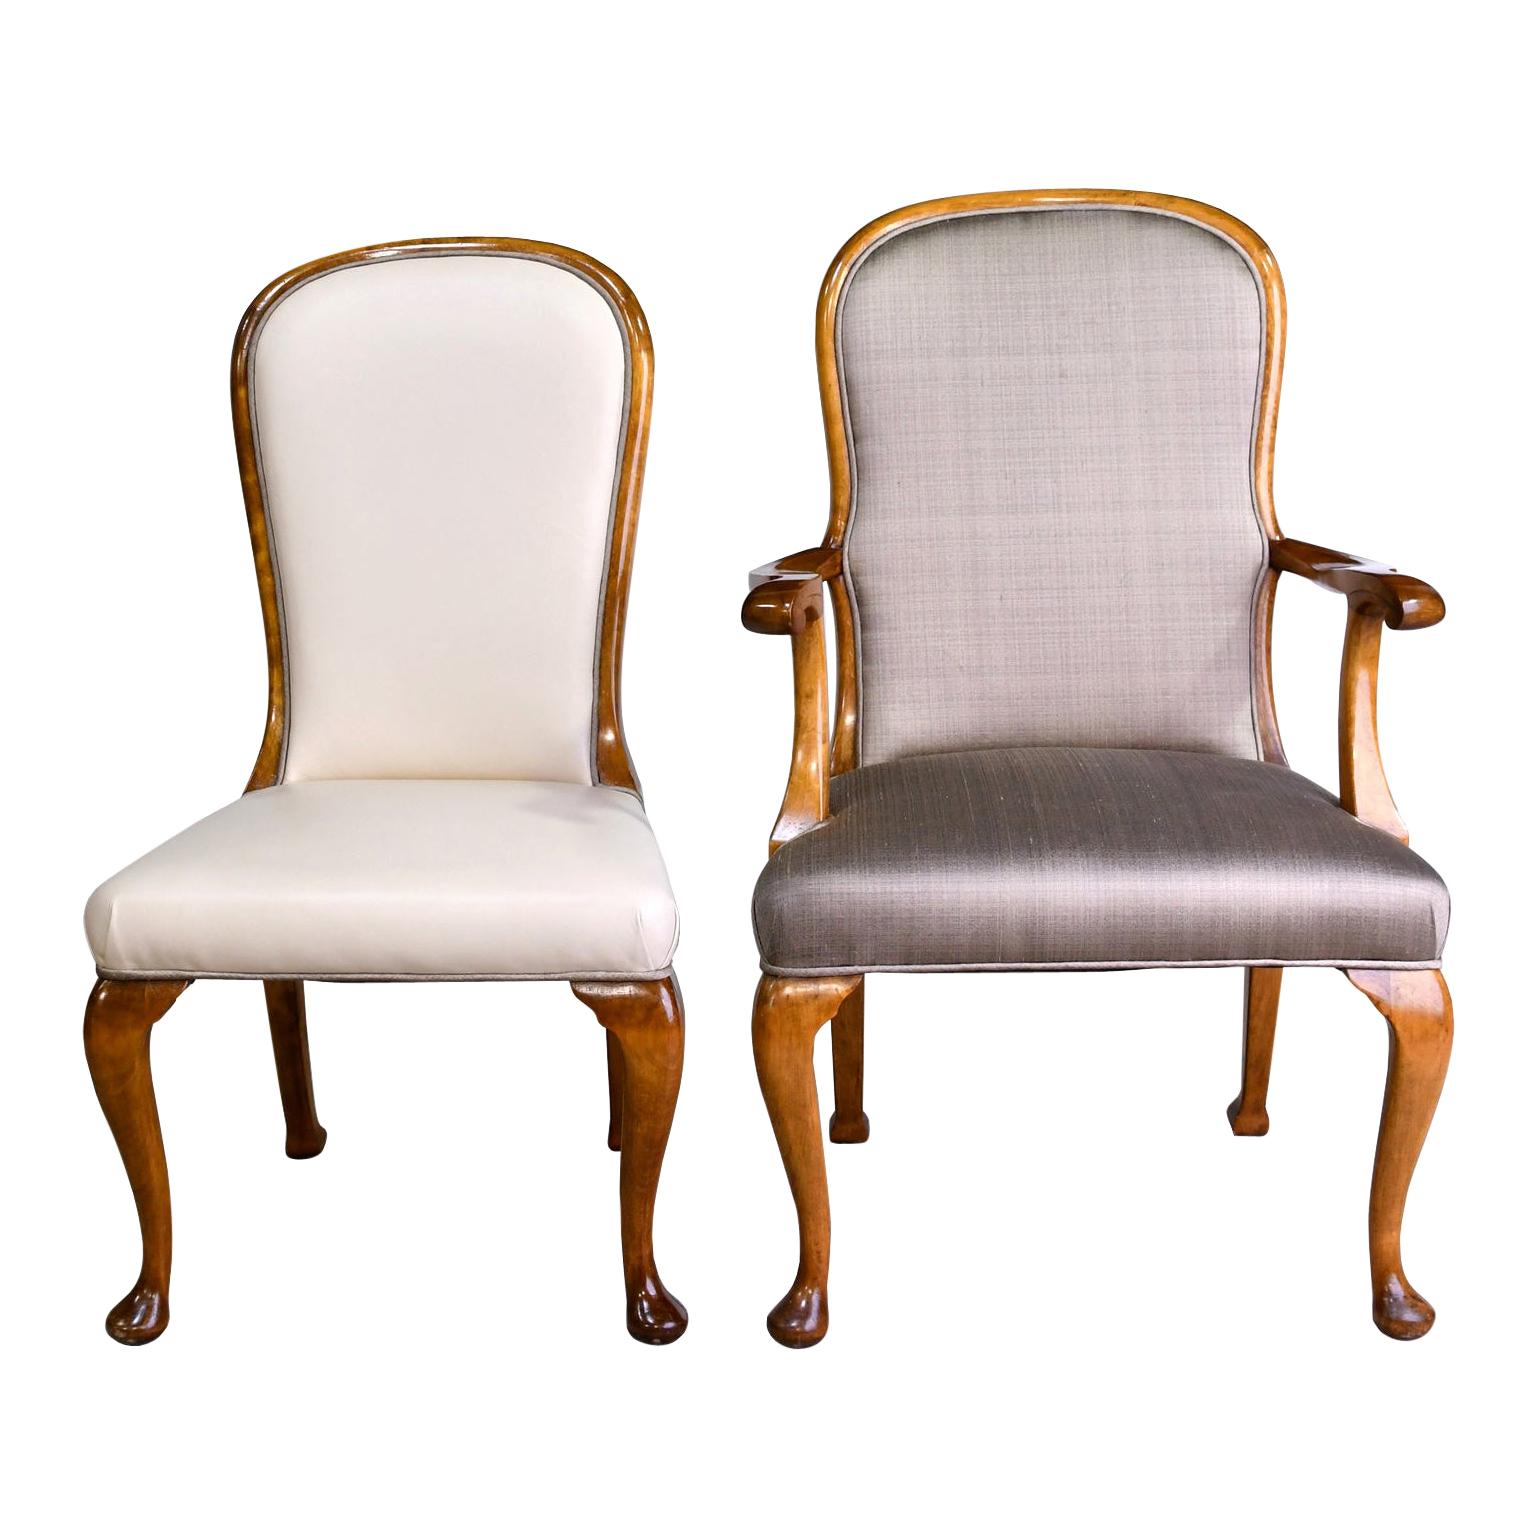 Set of 12 Dining Chairs in Birch with Upholstery, Nordiska Companiet circa 1930